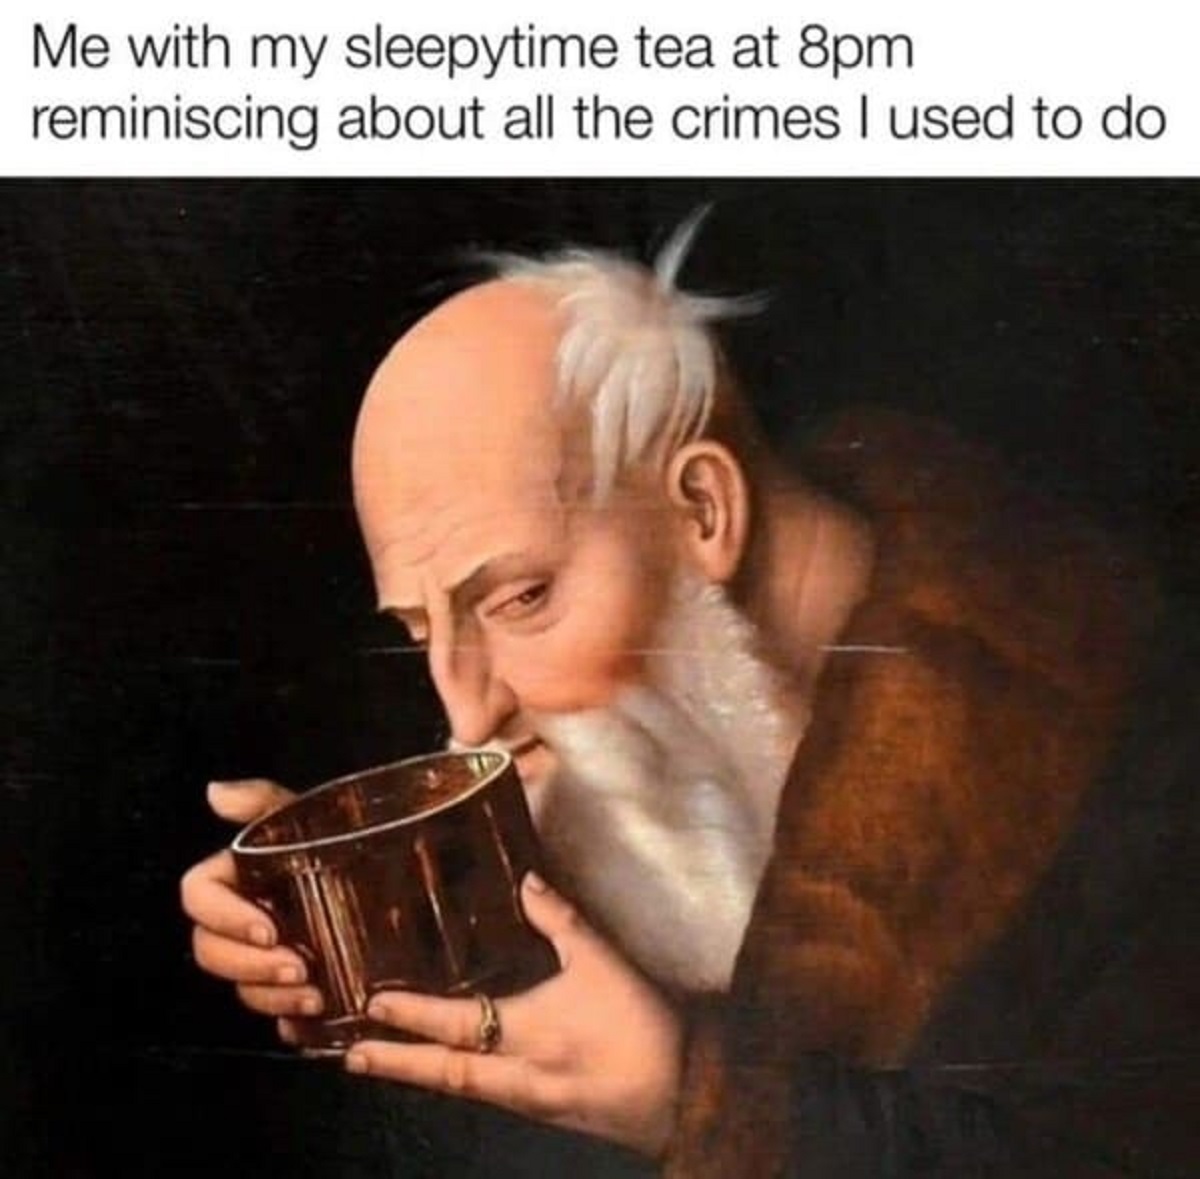 photo caption - Me with my sleepytime tea at 8pm reminiscing about all the crimes I used to do